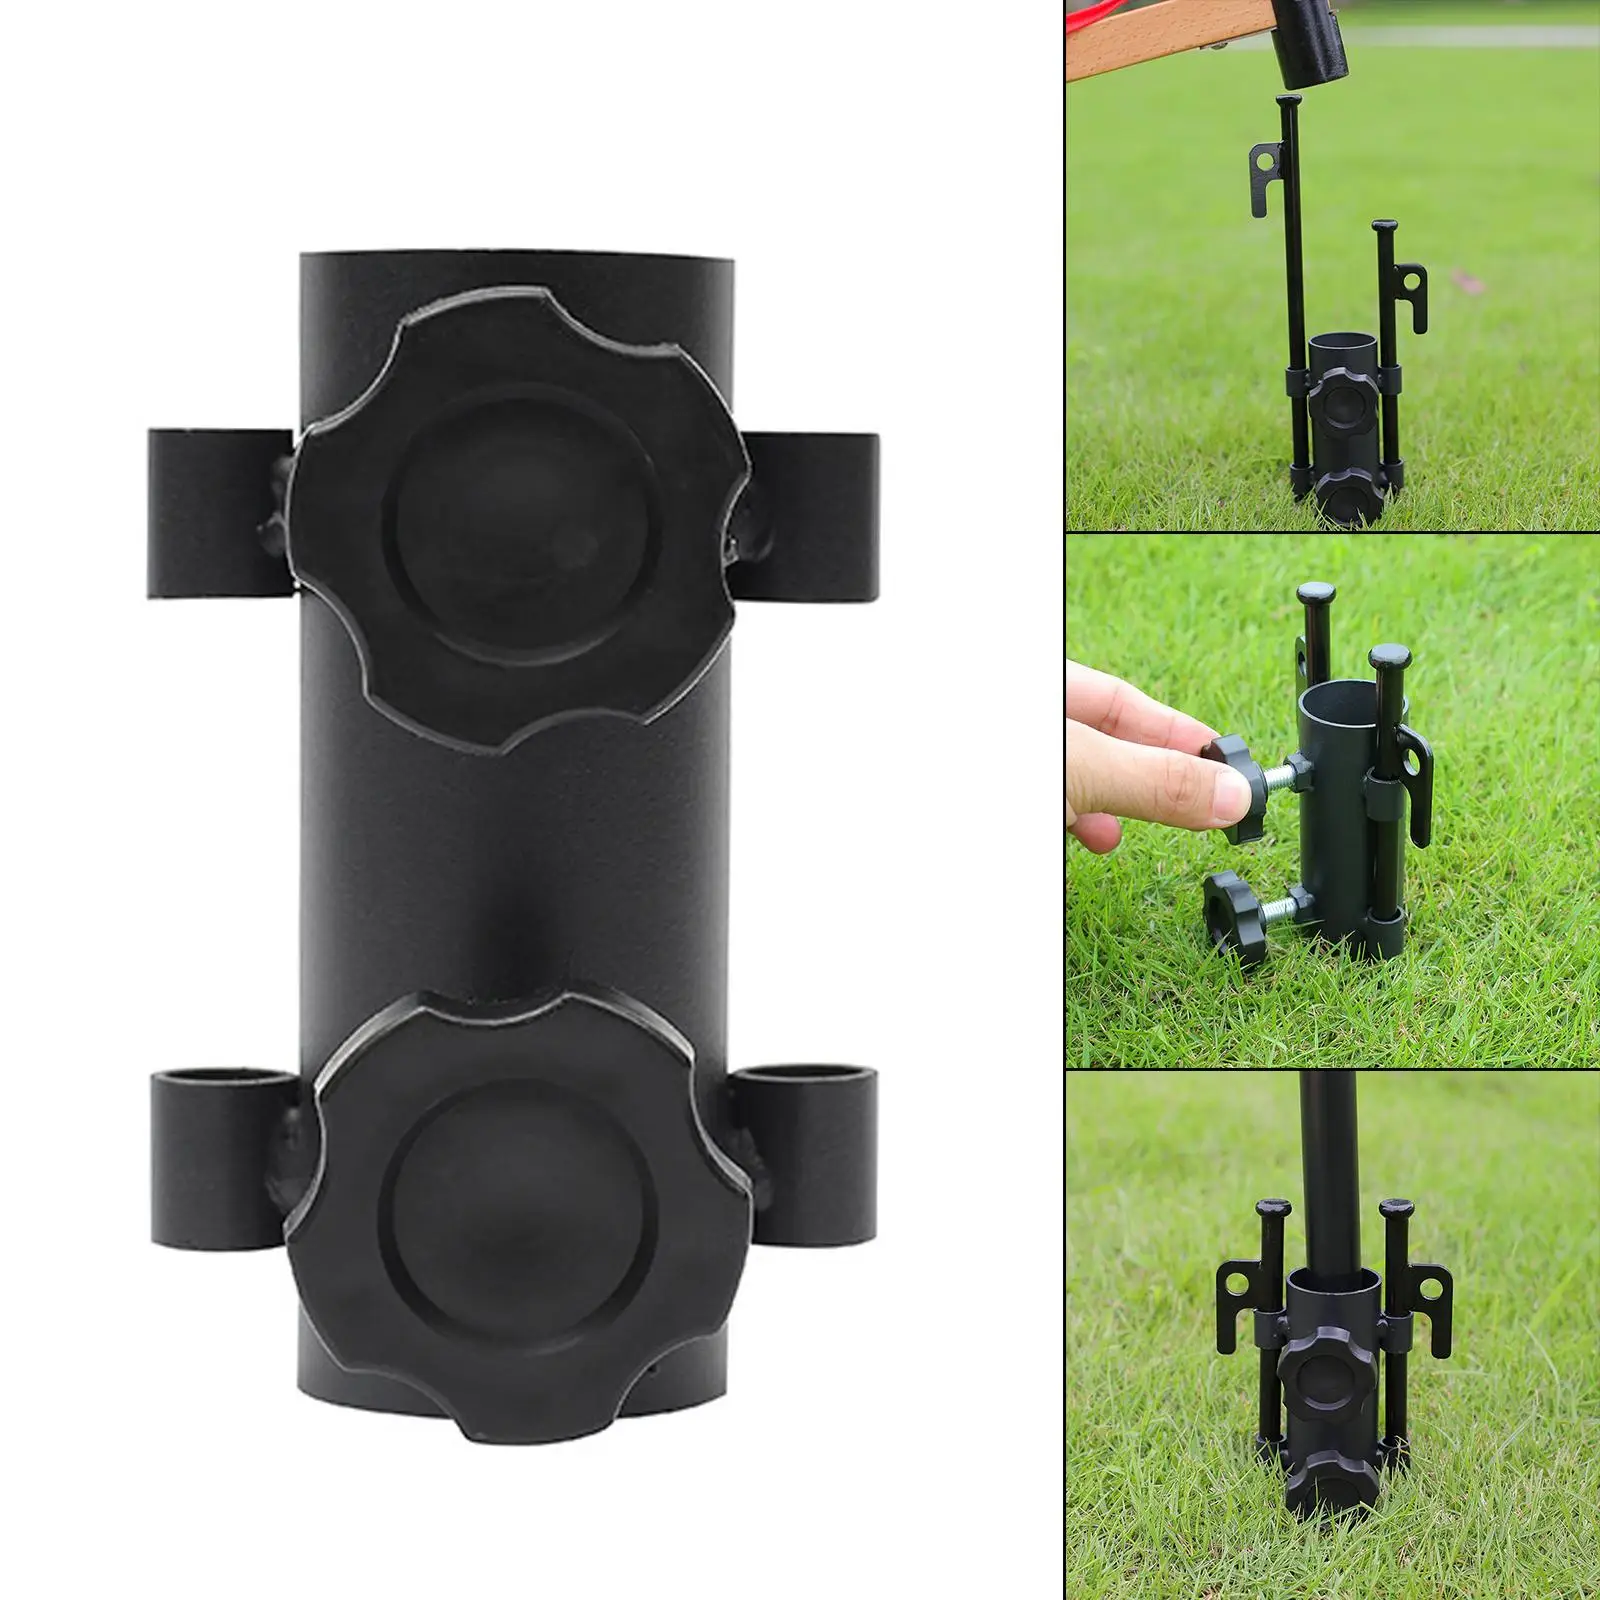 Portable Tent Rod Holder Fixed Tube Canopy Poles Stand for Outdoor Camping Traveling